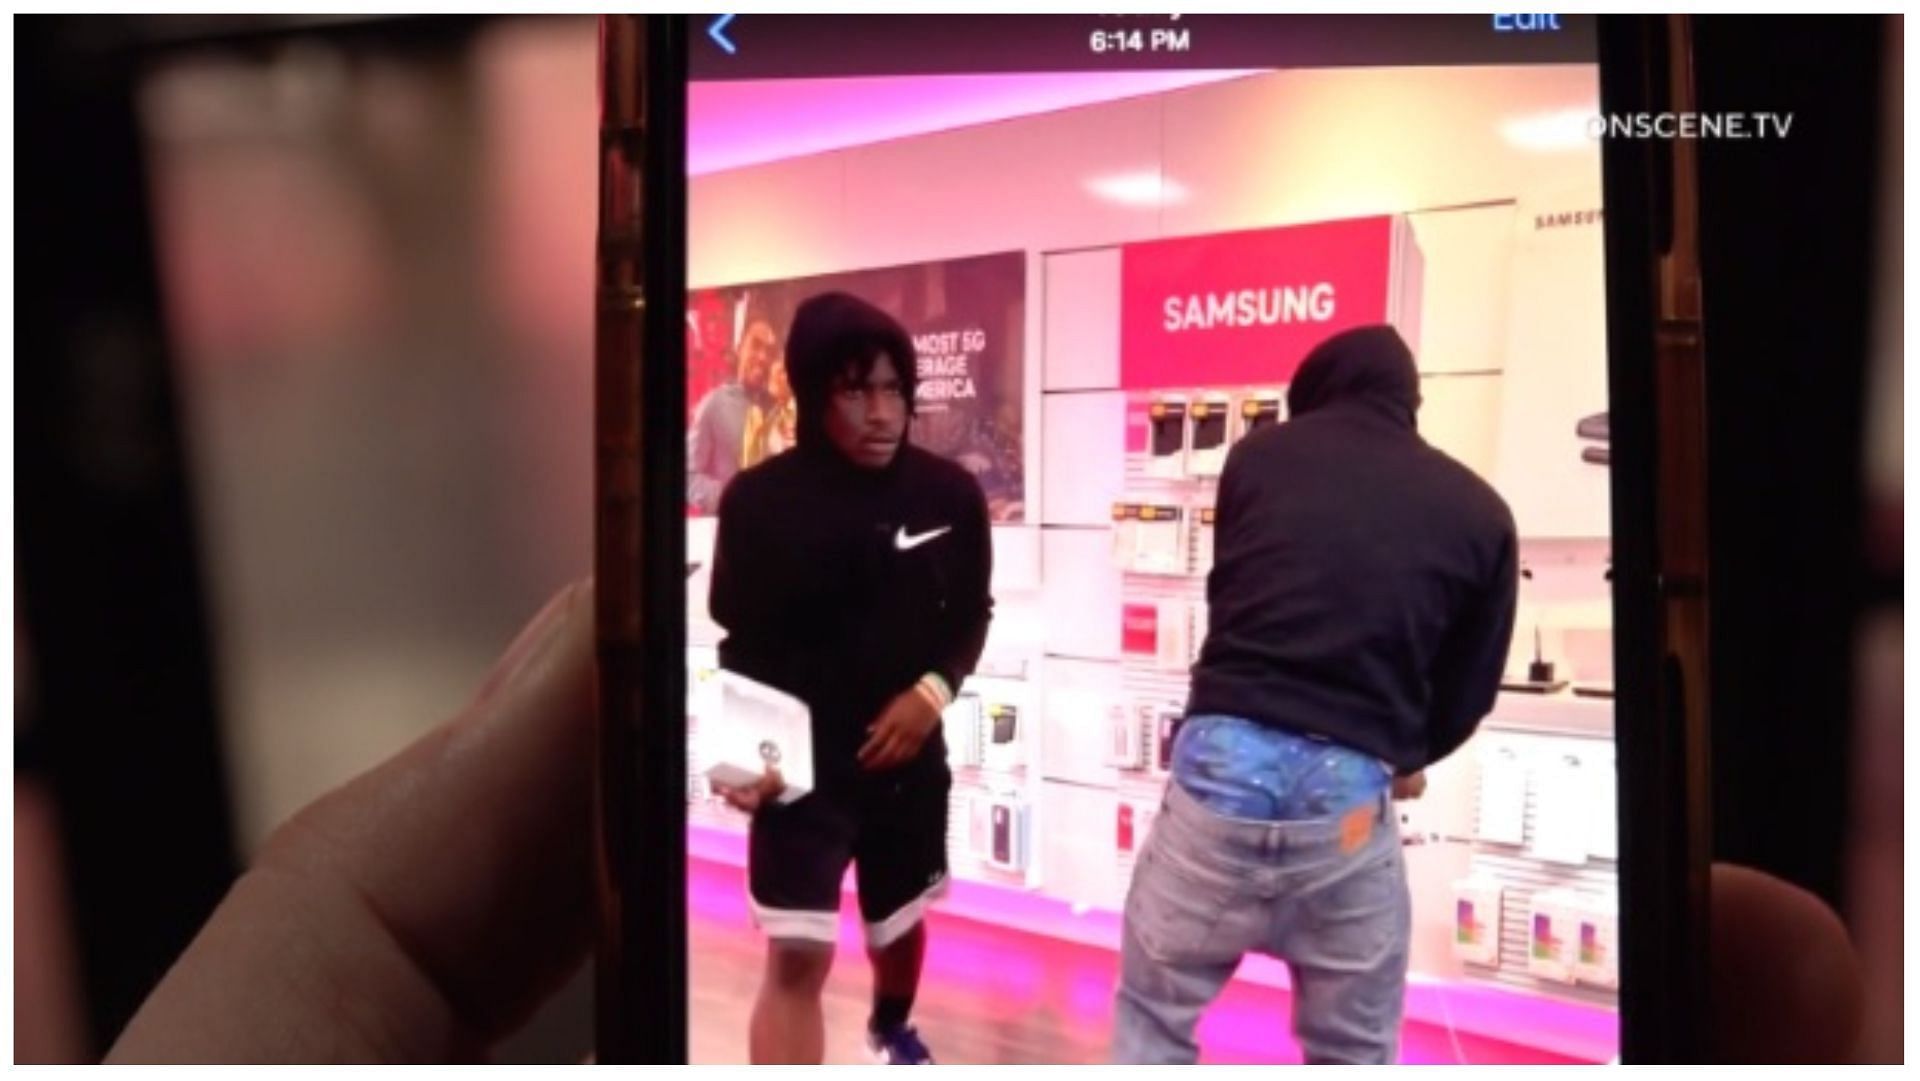 California thieves attacking T-Mobile store in smash-and-grab robbery in a footage released by authorities. (Image via Twitter/Screengrabbedimage)